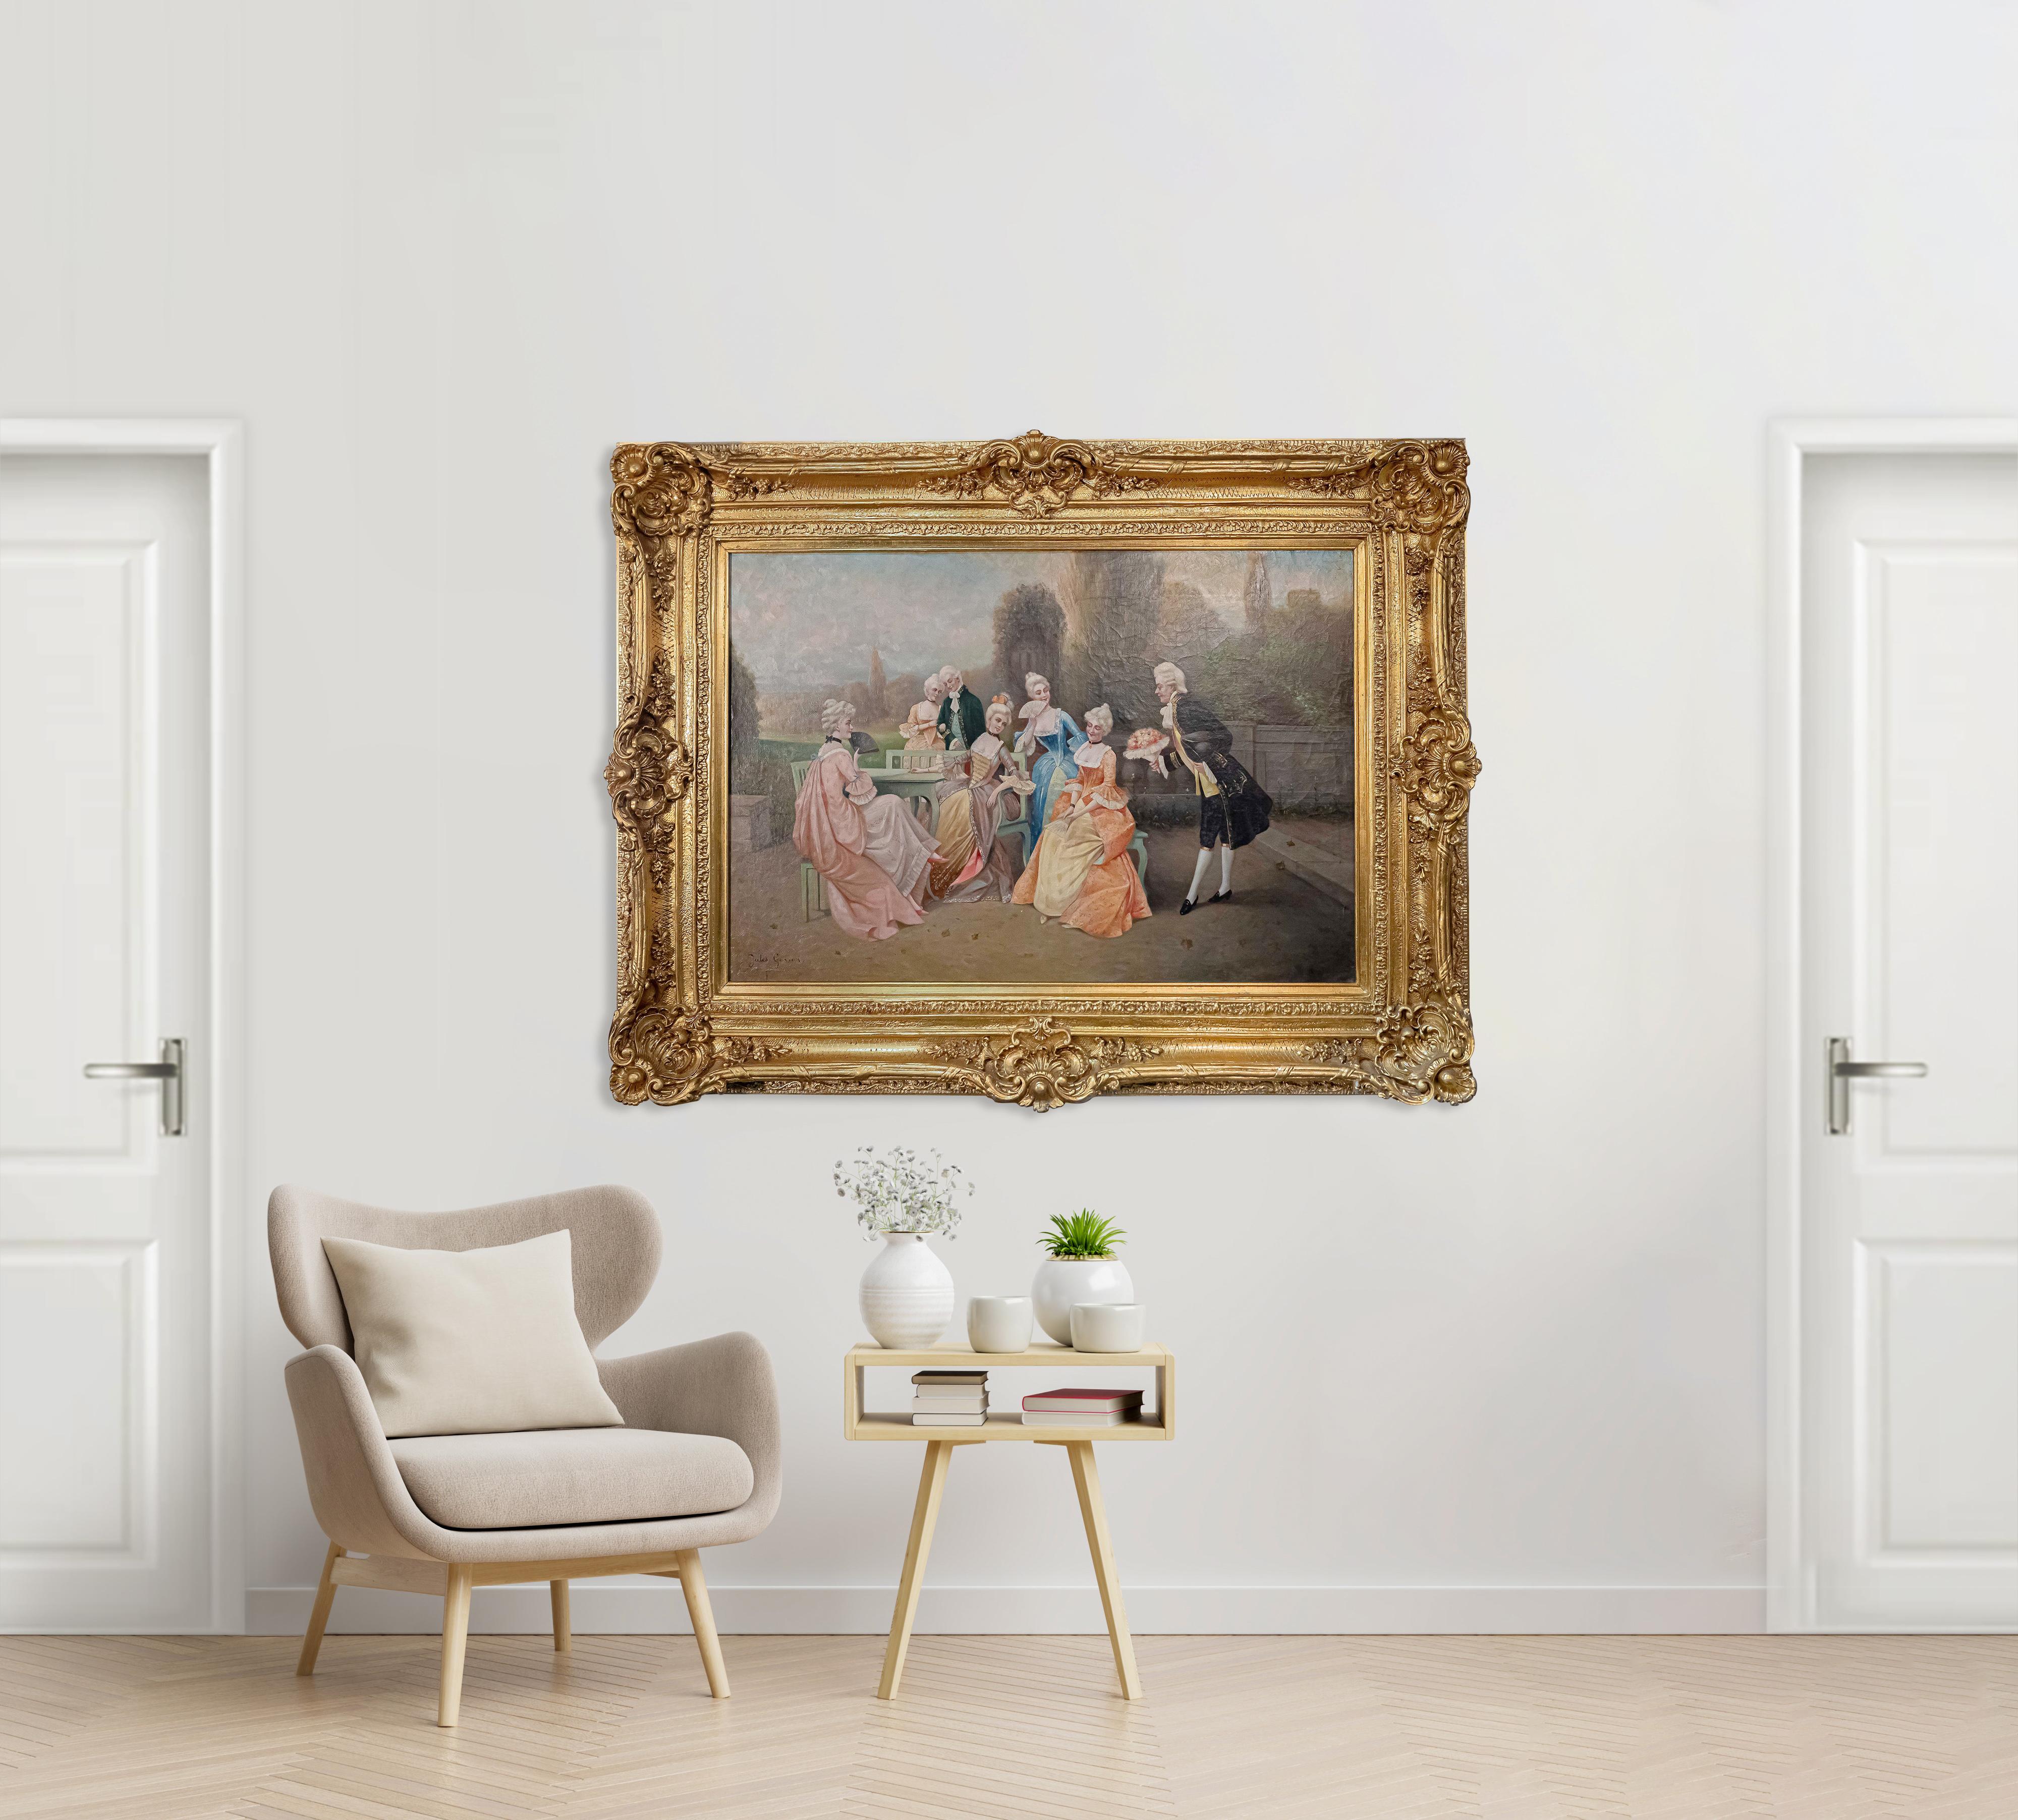 A 19th century French oil painting on canvas depicting classical figures in landscape, with a standing gentleman presenting bouquet of flowers to a sitting lady.

Signed: Jules Garson

Framed
Height: 44